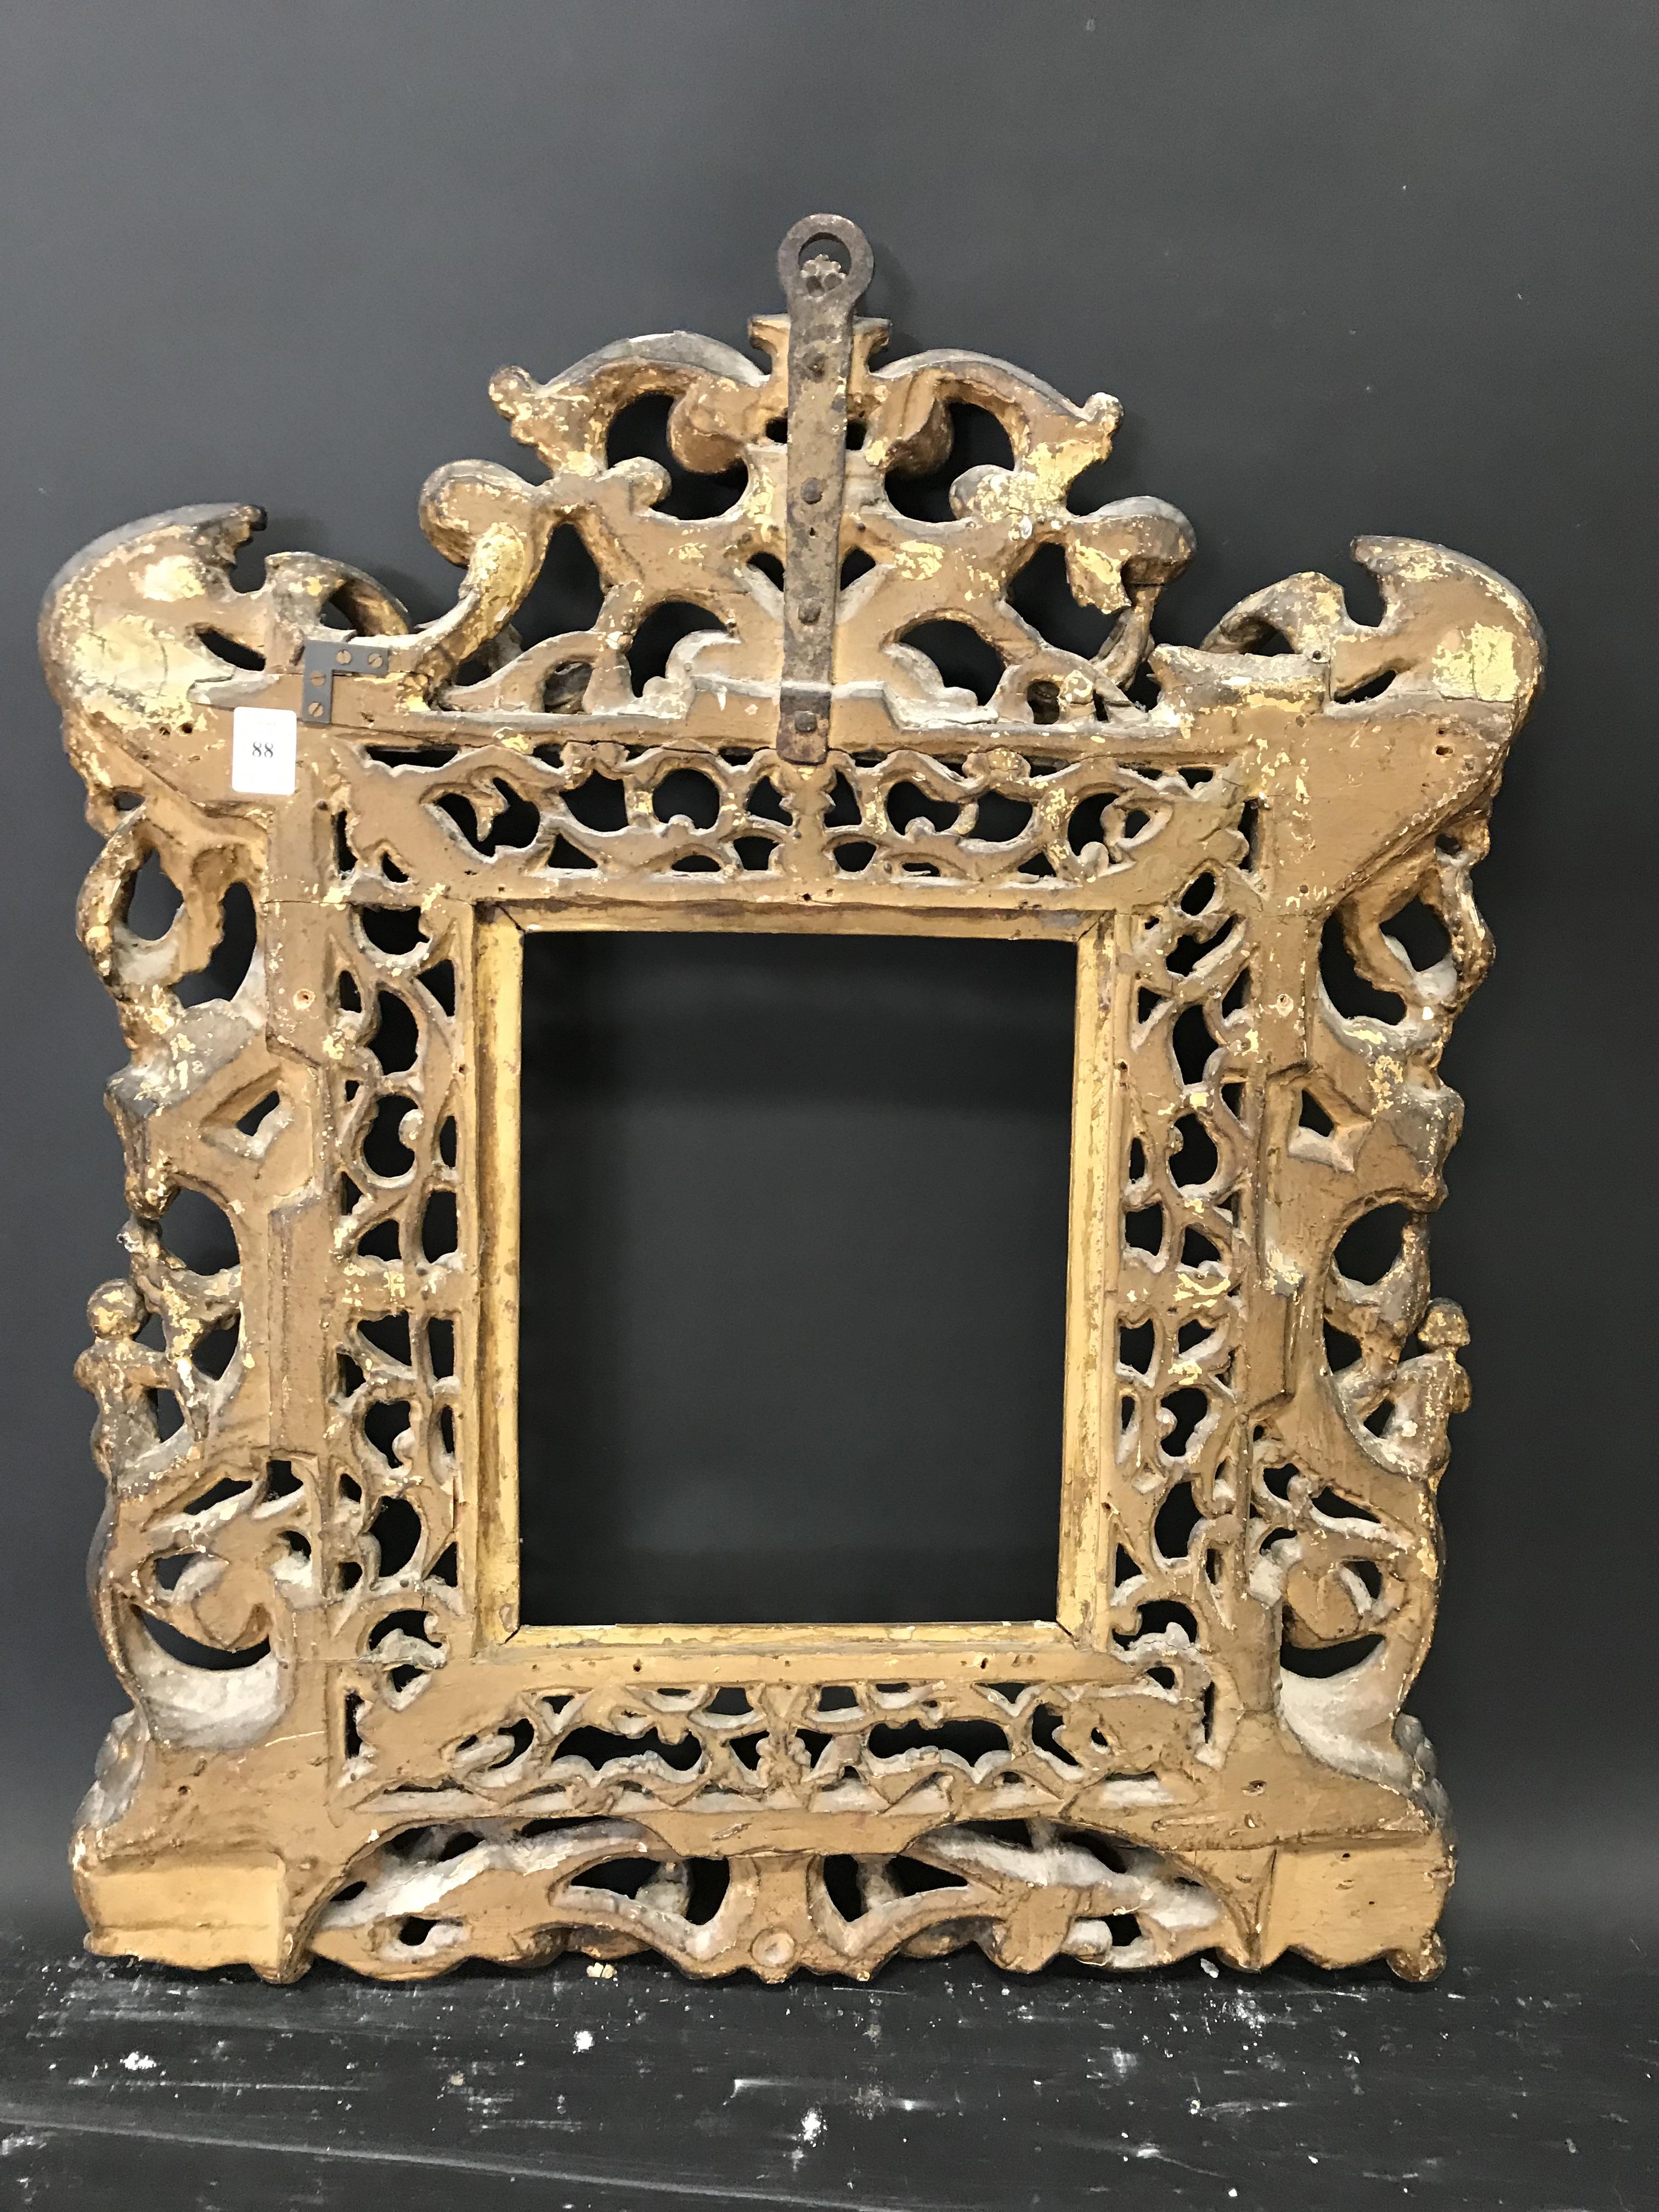 18th Century Italian School. A Carved Giltwood and Composition Altar Frame, with Swept and Pierced - Image 2 of 2